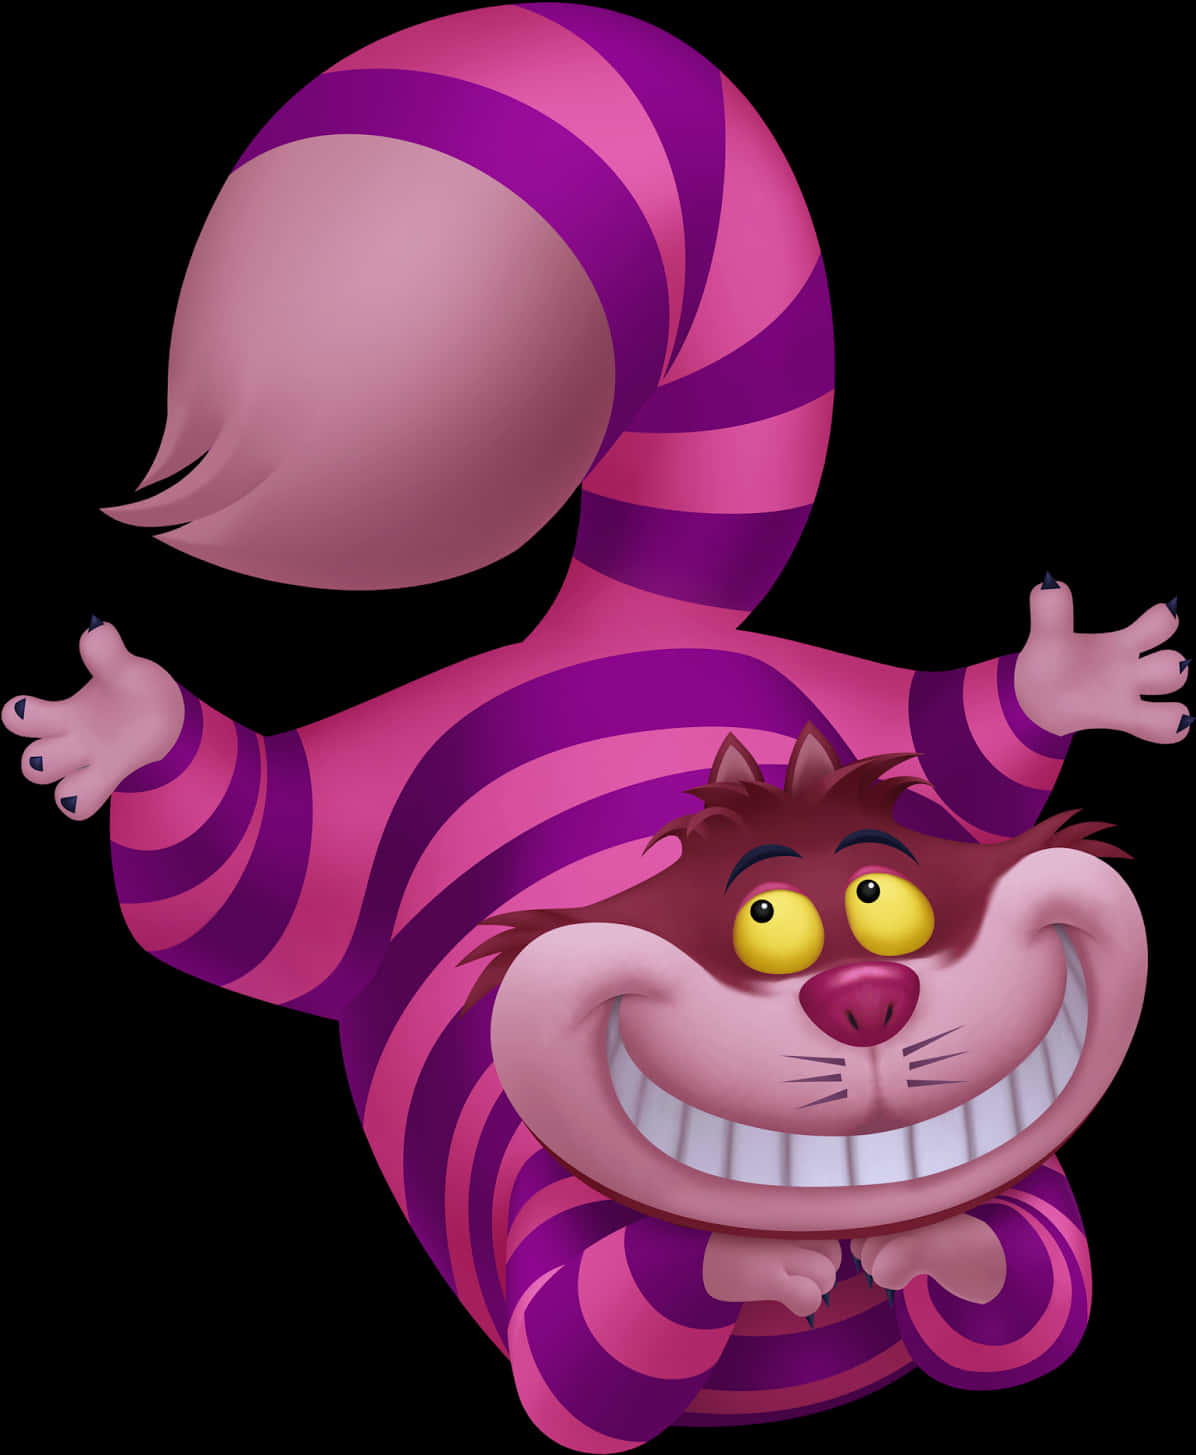 Cheshire Cat Grinning Disney Character PNG